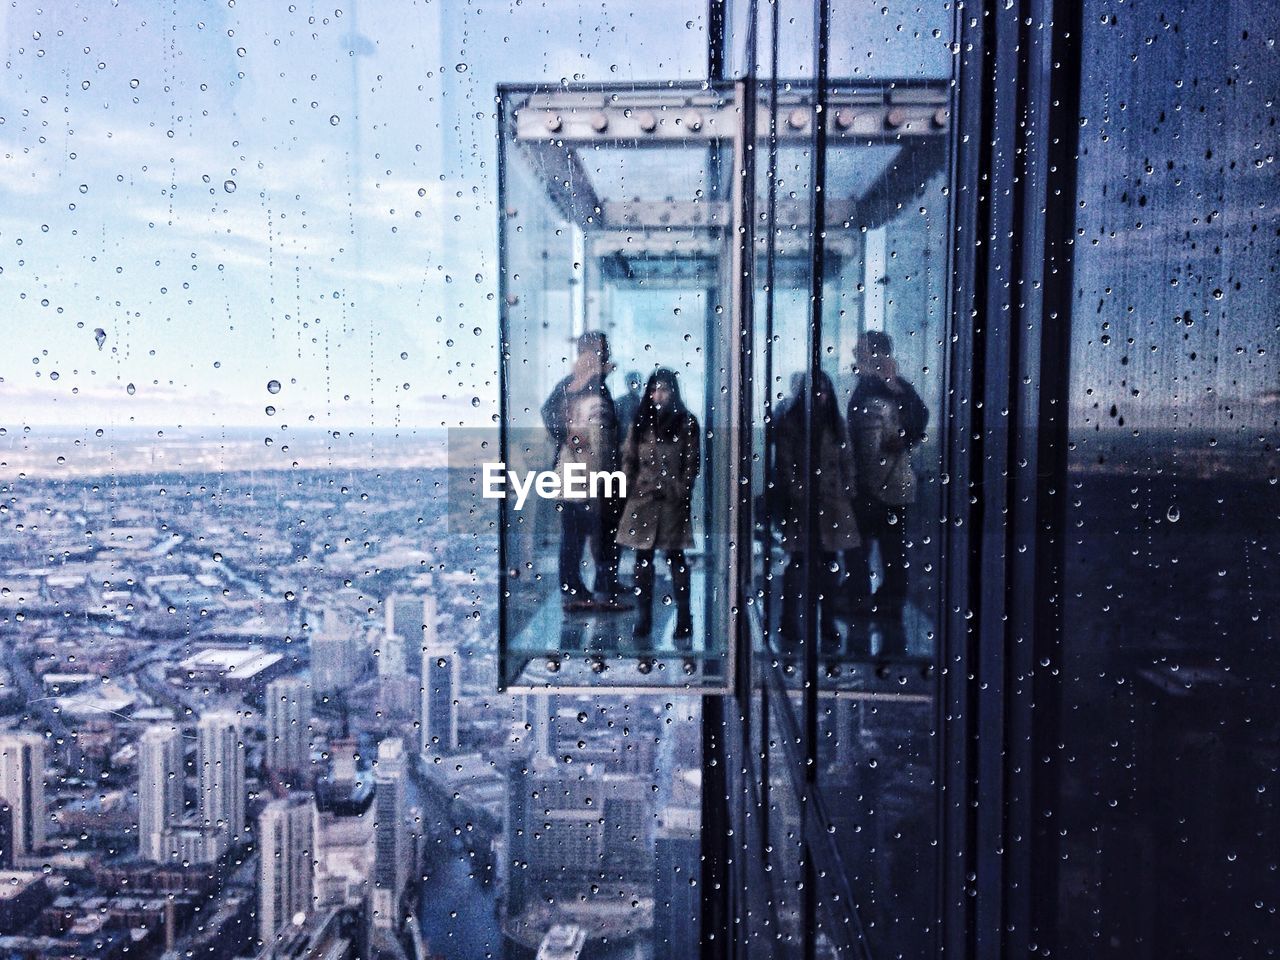 People in glass elevator over cityscape during rainy season